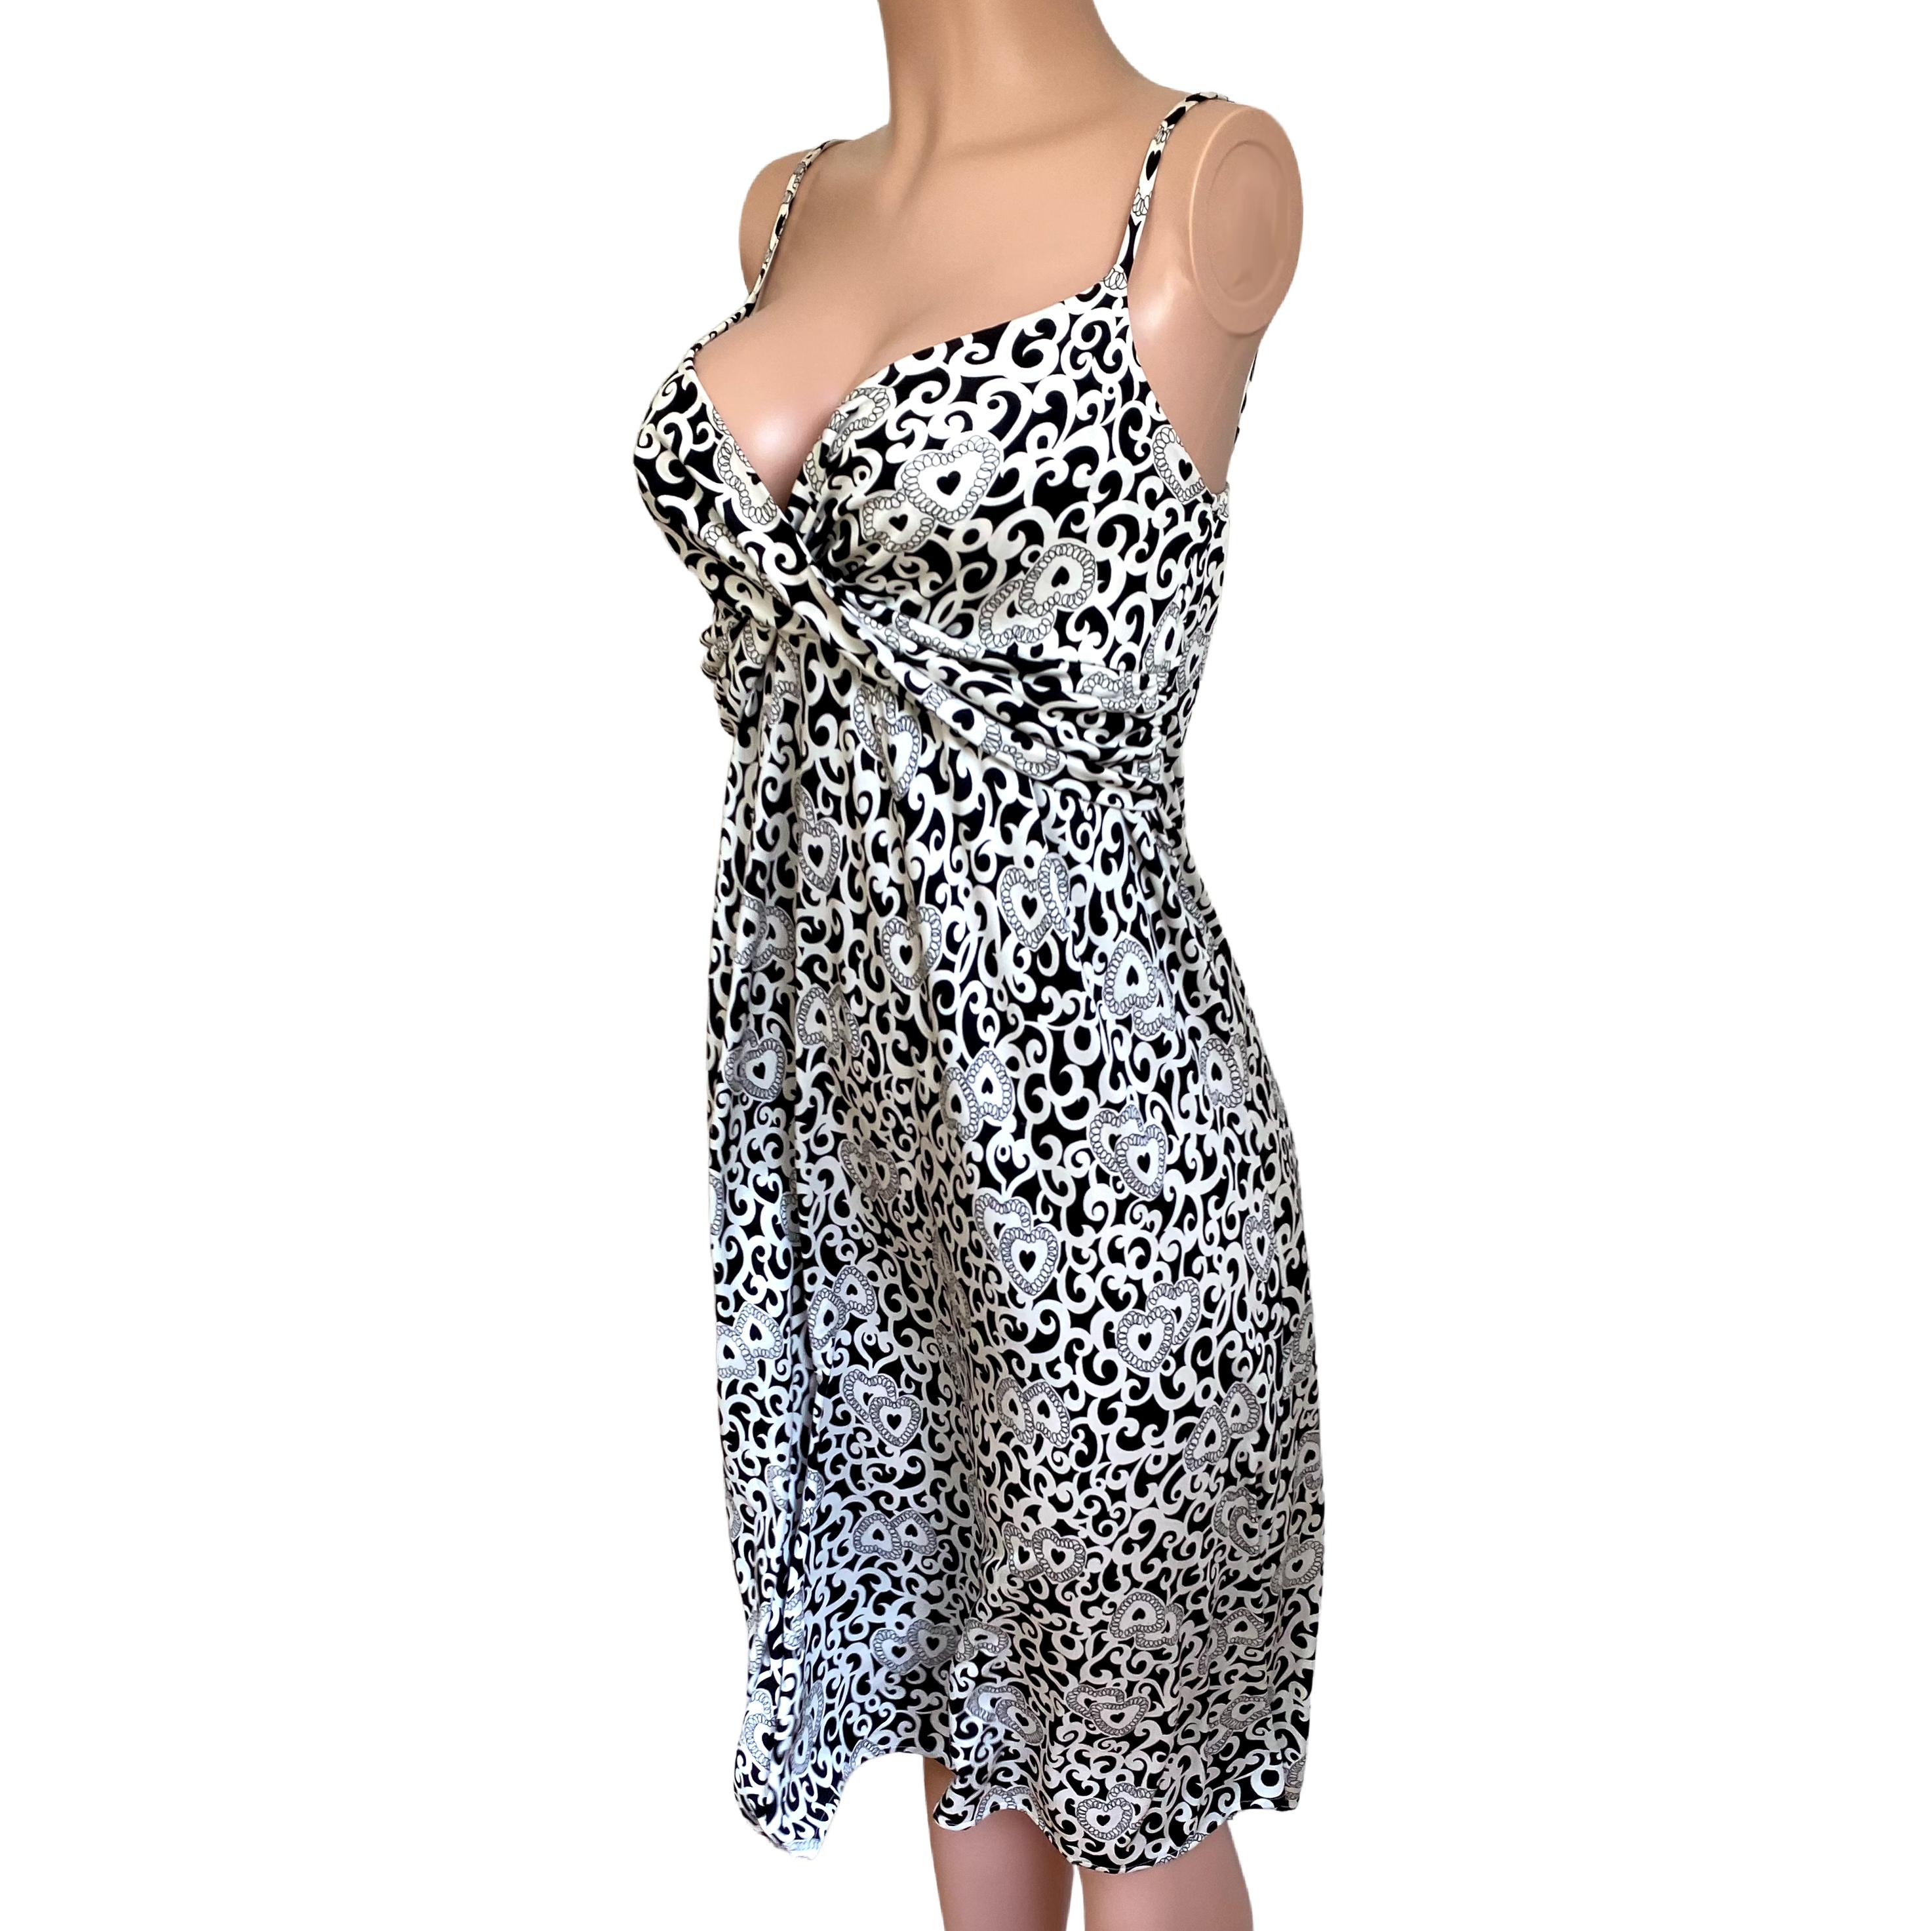 100% silk jersey 'Amelie' dress in hearts print.
Easy to wear: elastic back and adjustable shoulder strap for a perfect easy fit.
Size tag: US 4 = UK 8 = French 36 
Approximately 46